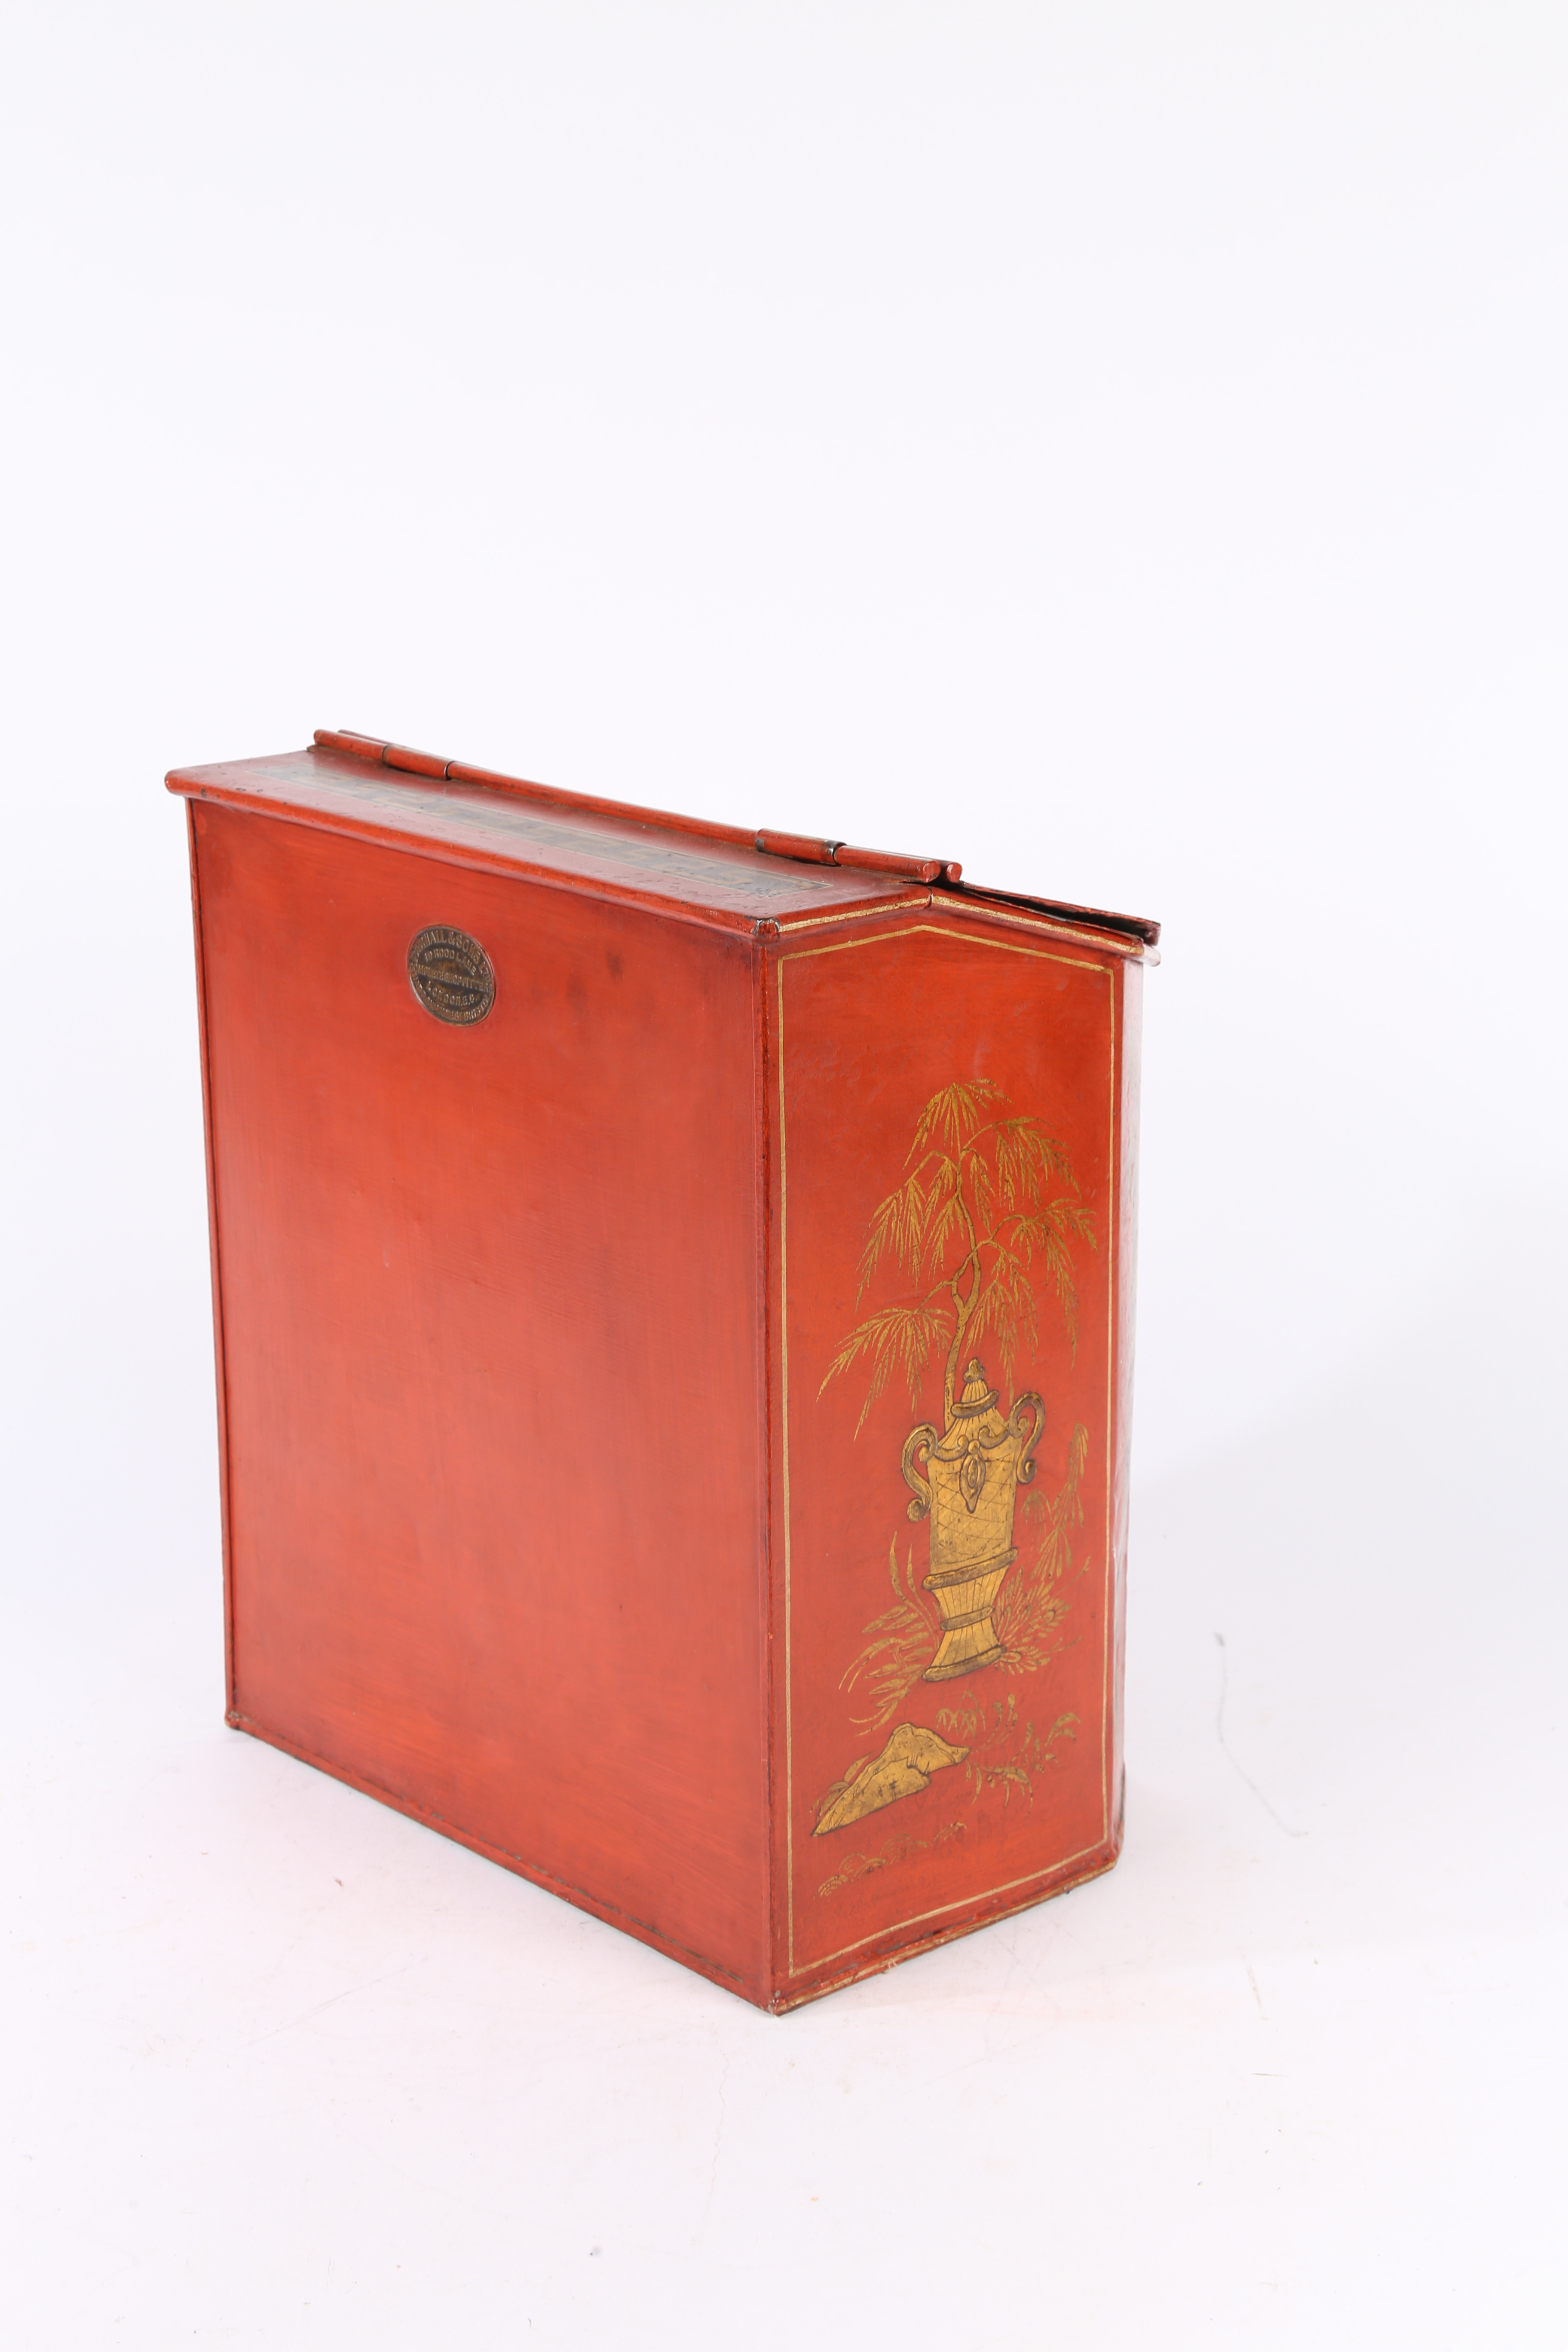 A LARGE 19TH CENTURY SHOP KEEPERS RED TOLEWARE TEA TIN. - Image 7 of 8